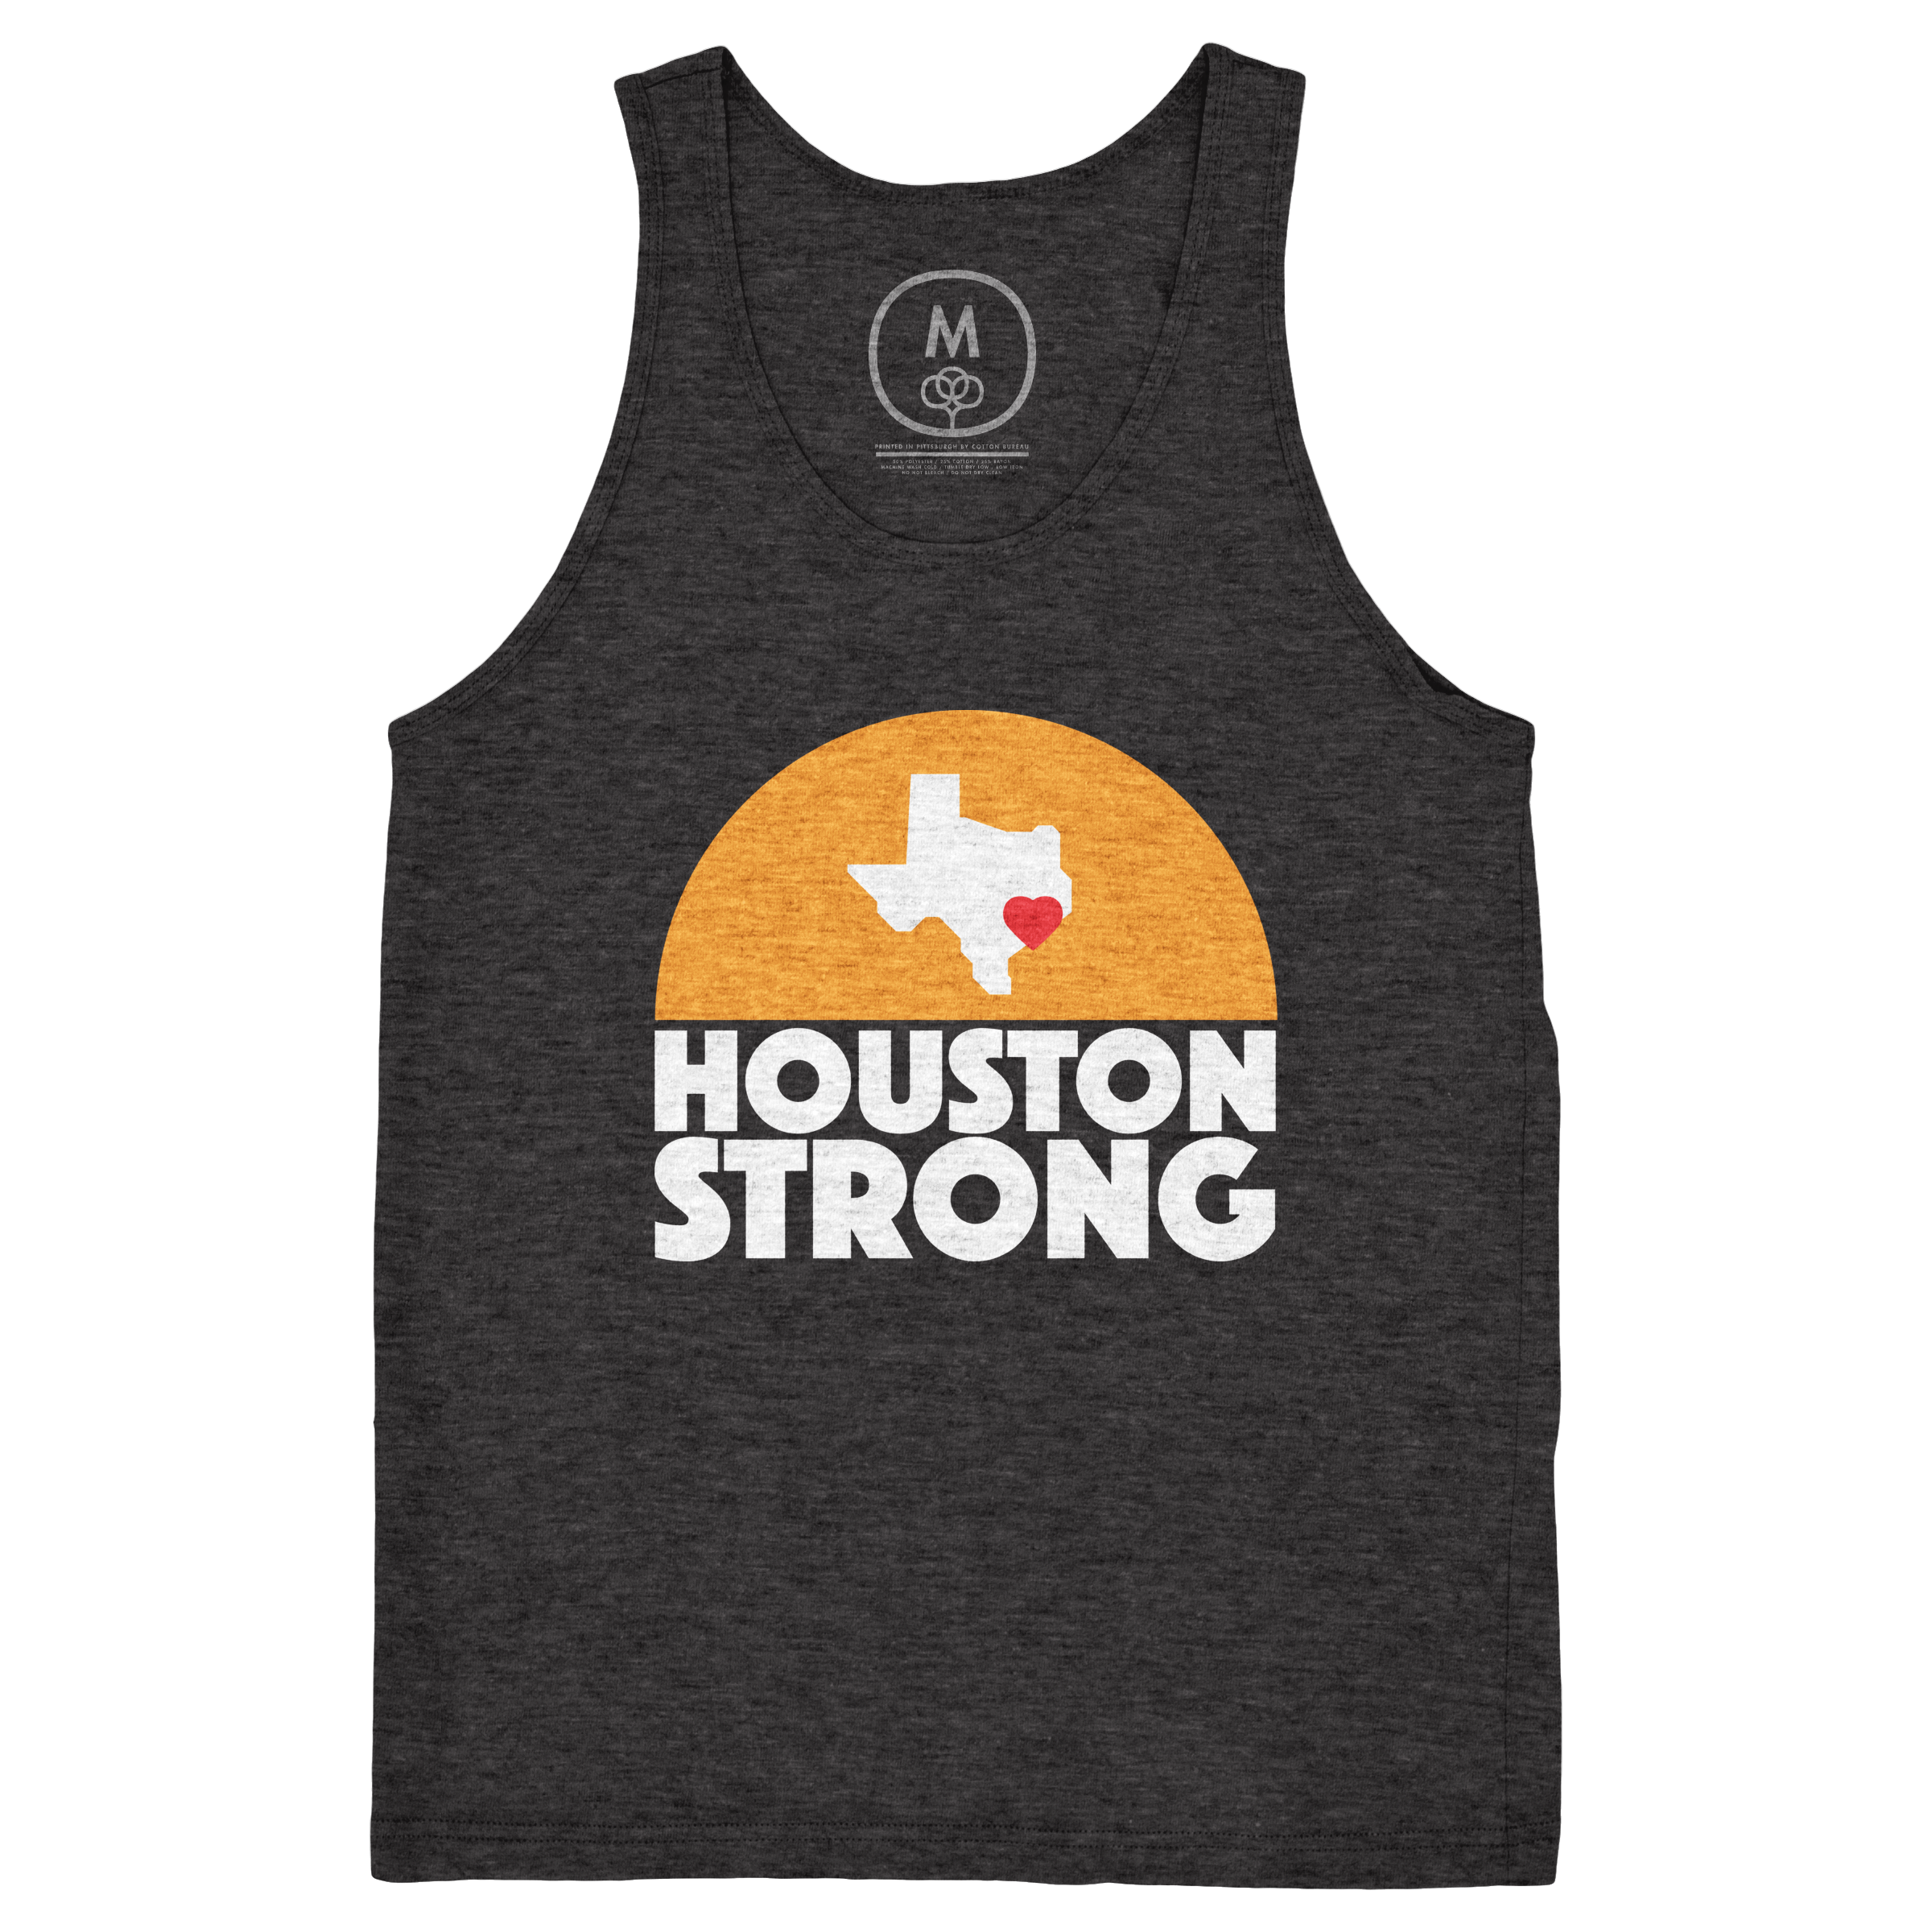 Houston Strong - Tank Top